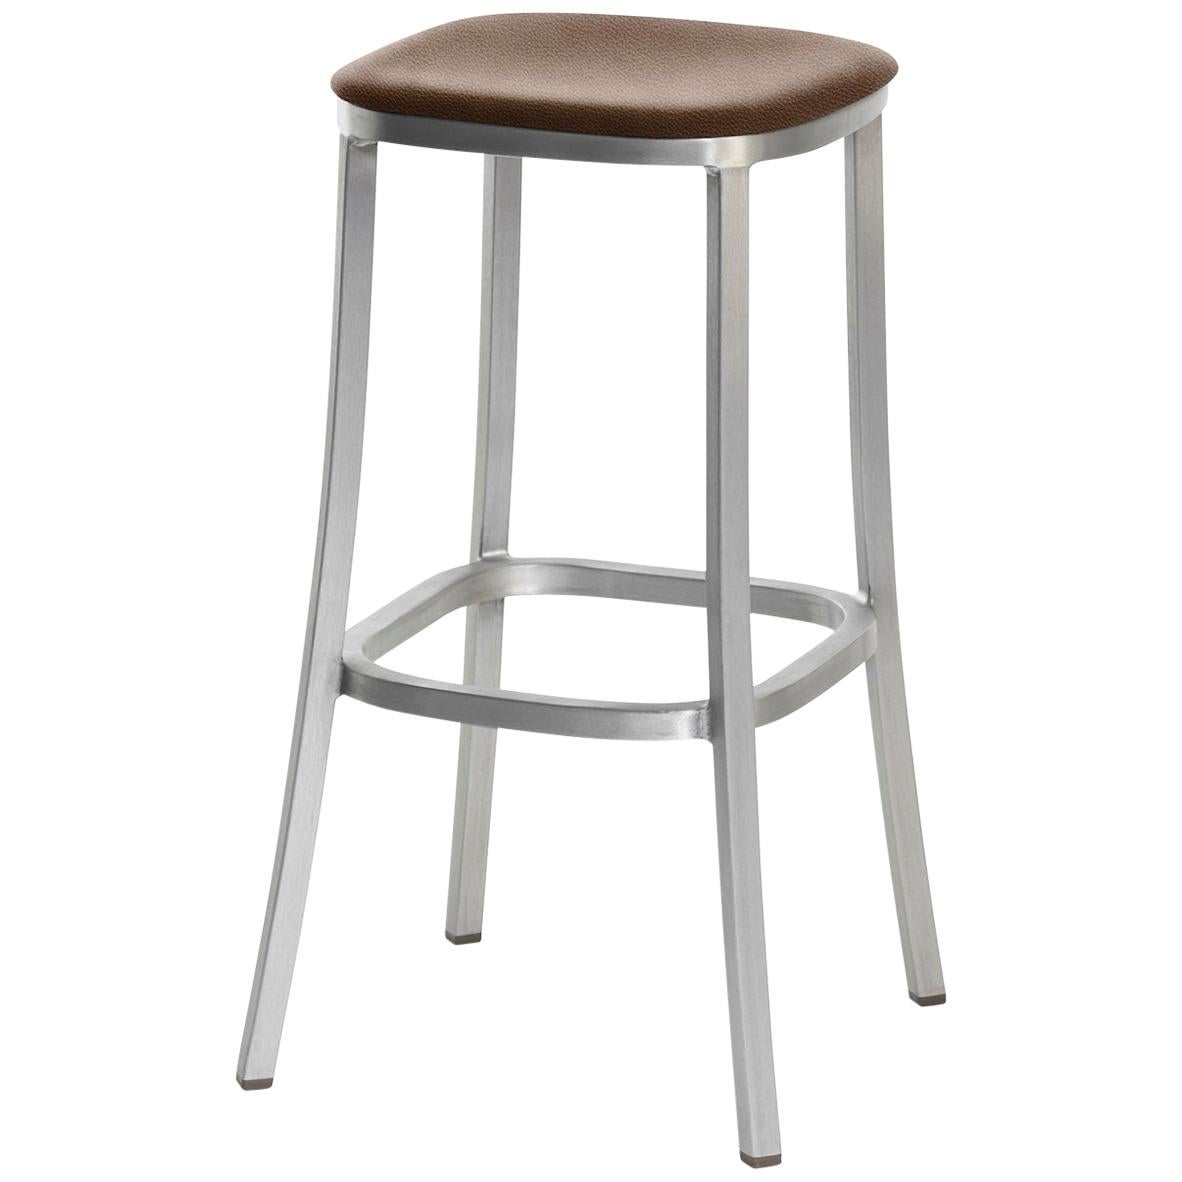 Emeco 1 Inch Barstool with Aluminum Legs & Brown Upholstery by Jasper Morrison